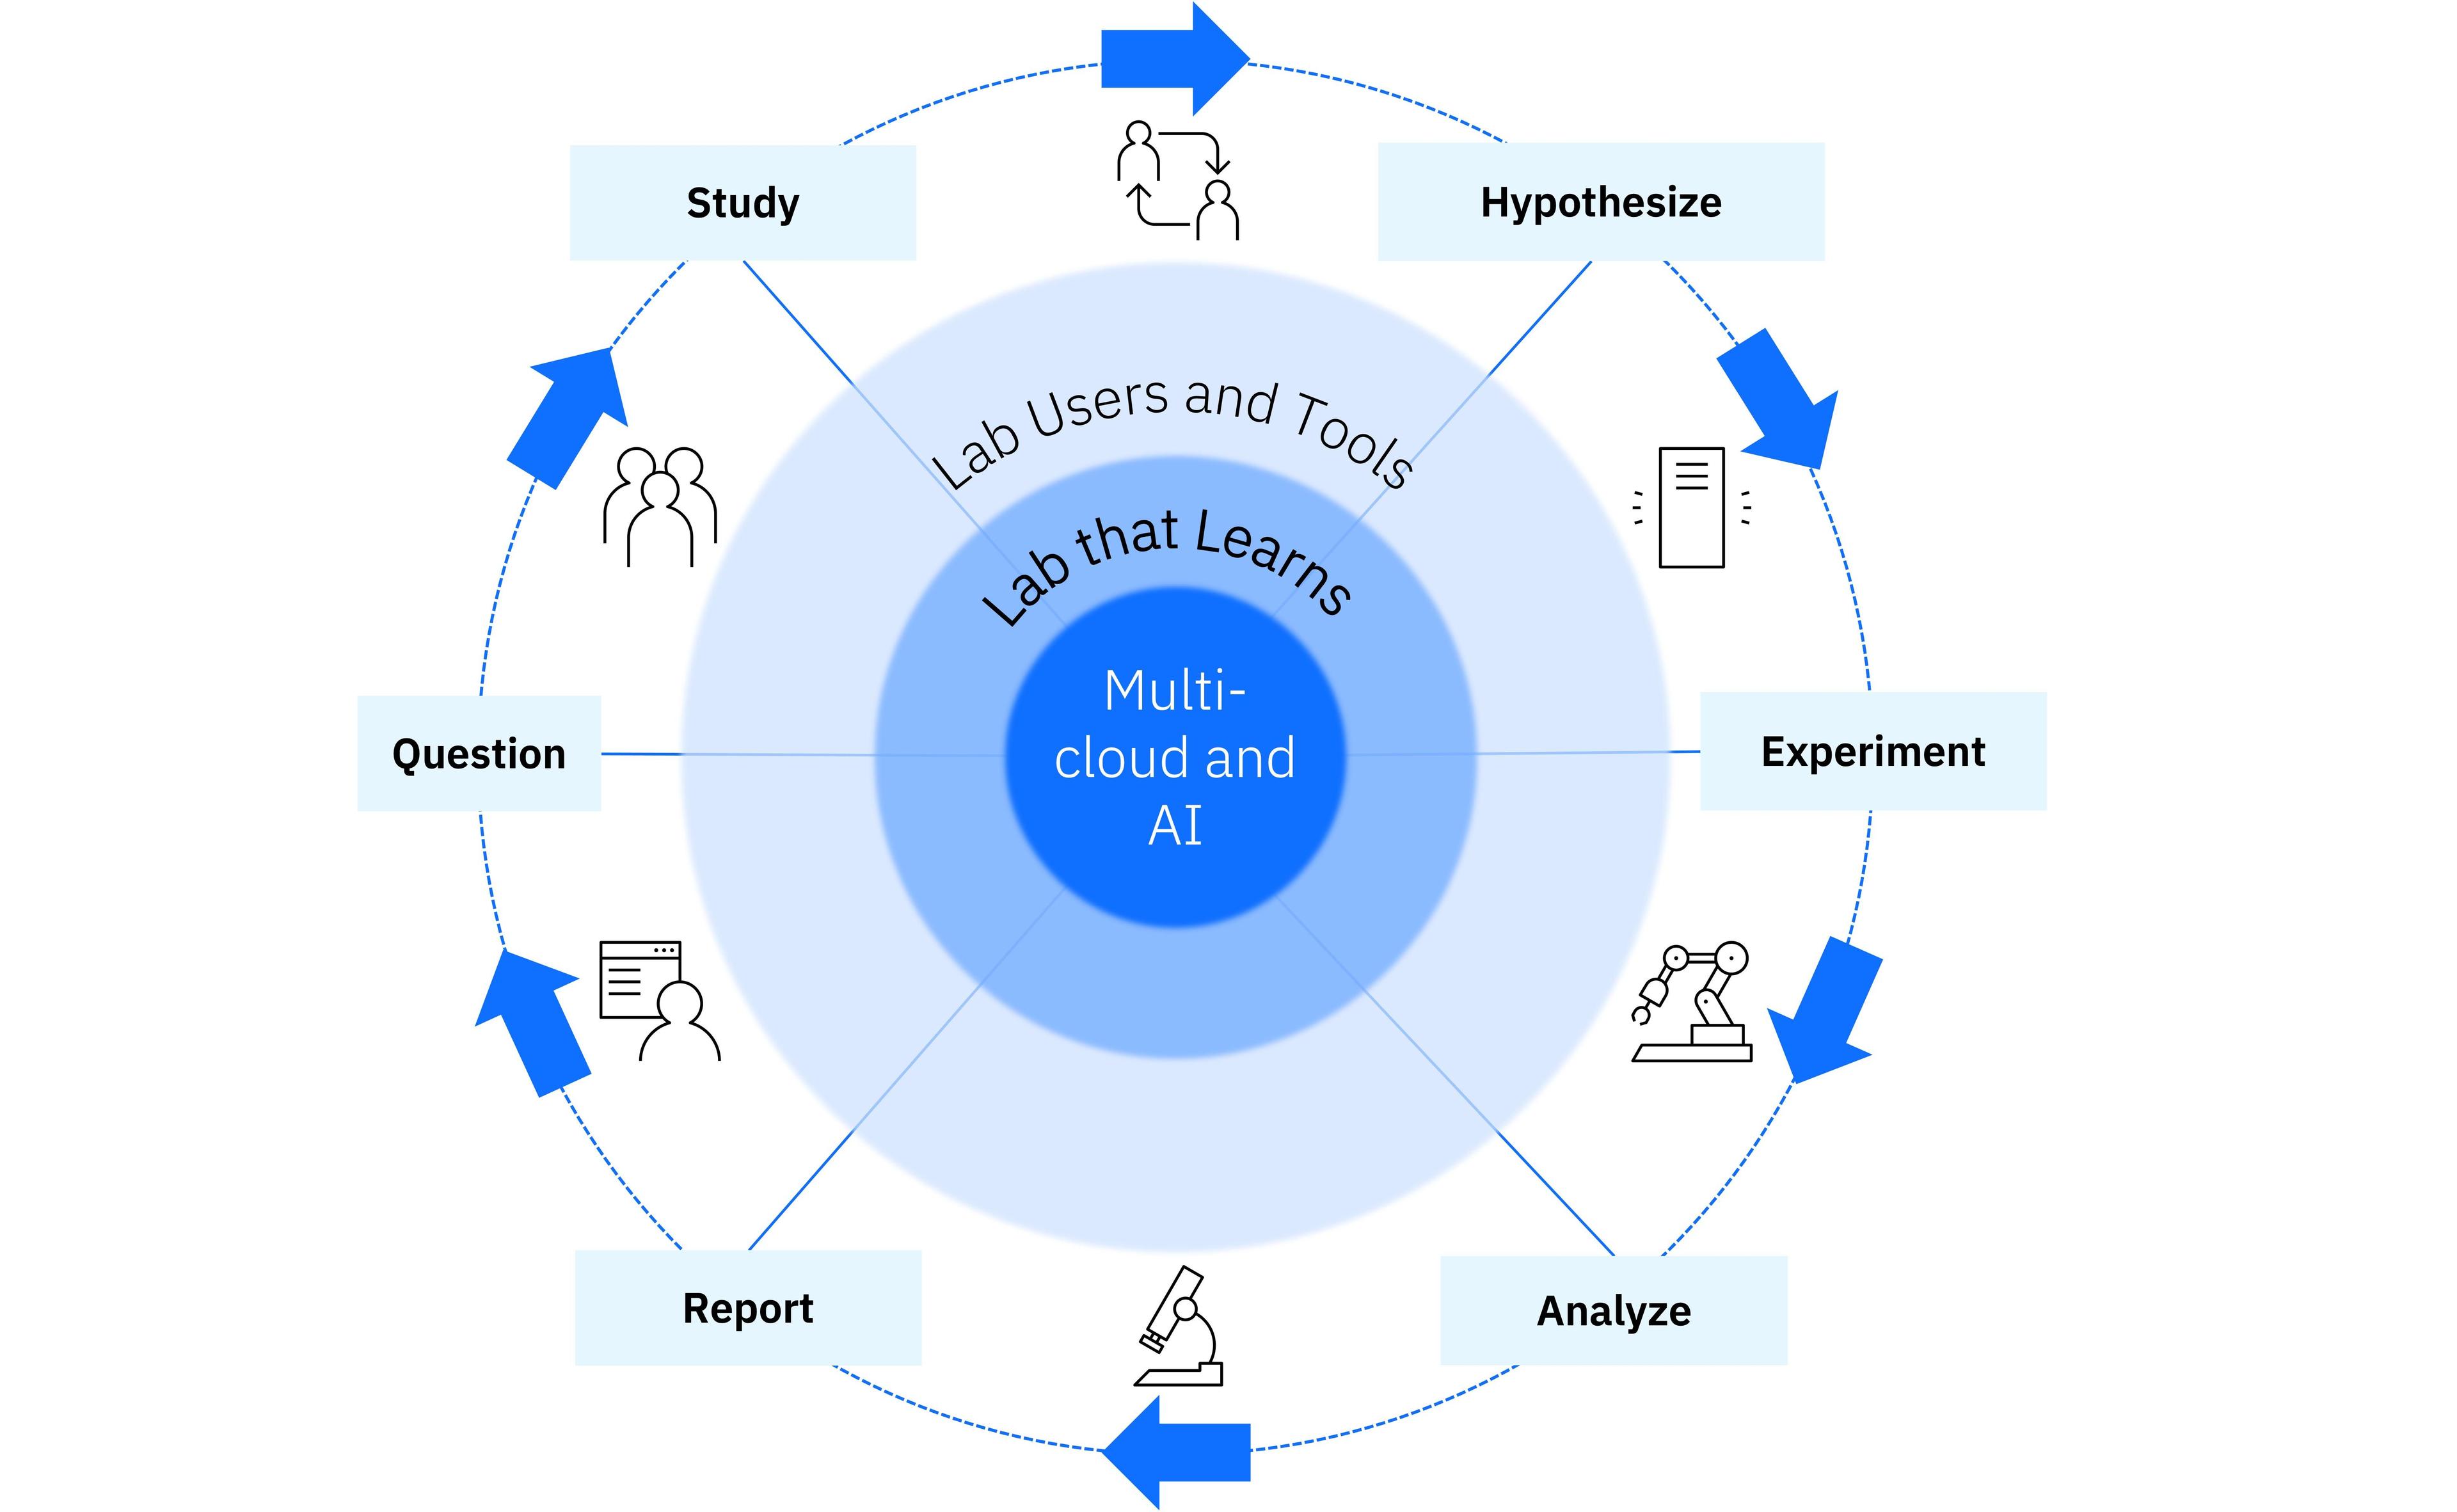 Accelerating the scientific method by leveraging AI and multi-cloud computing at each stage of the scientific process for automated documentation and data capture.